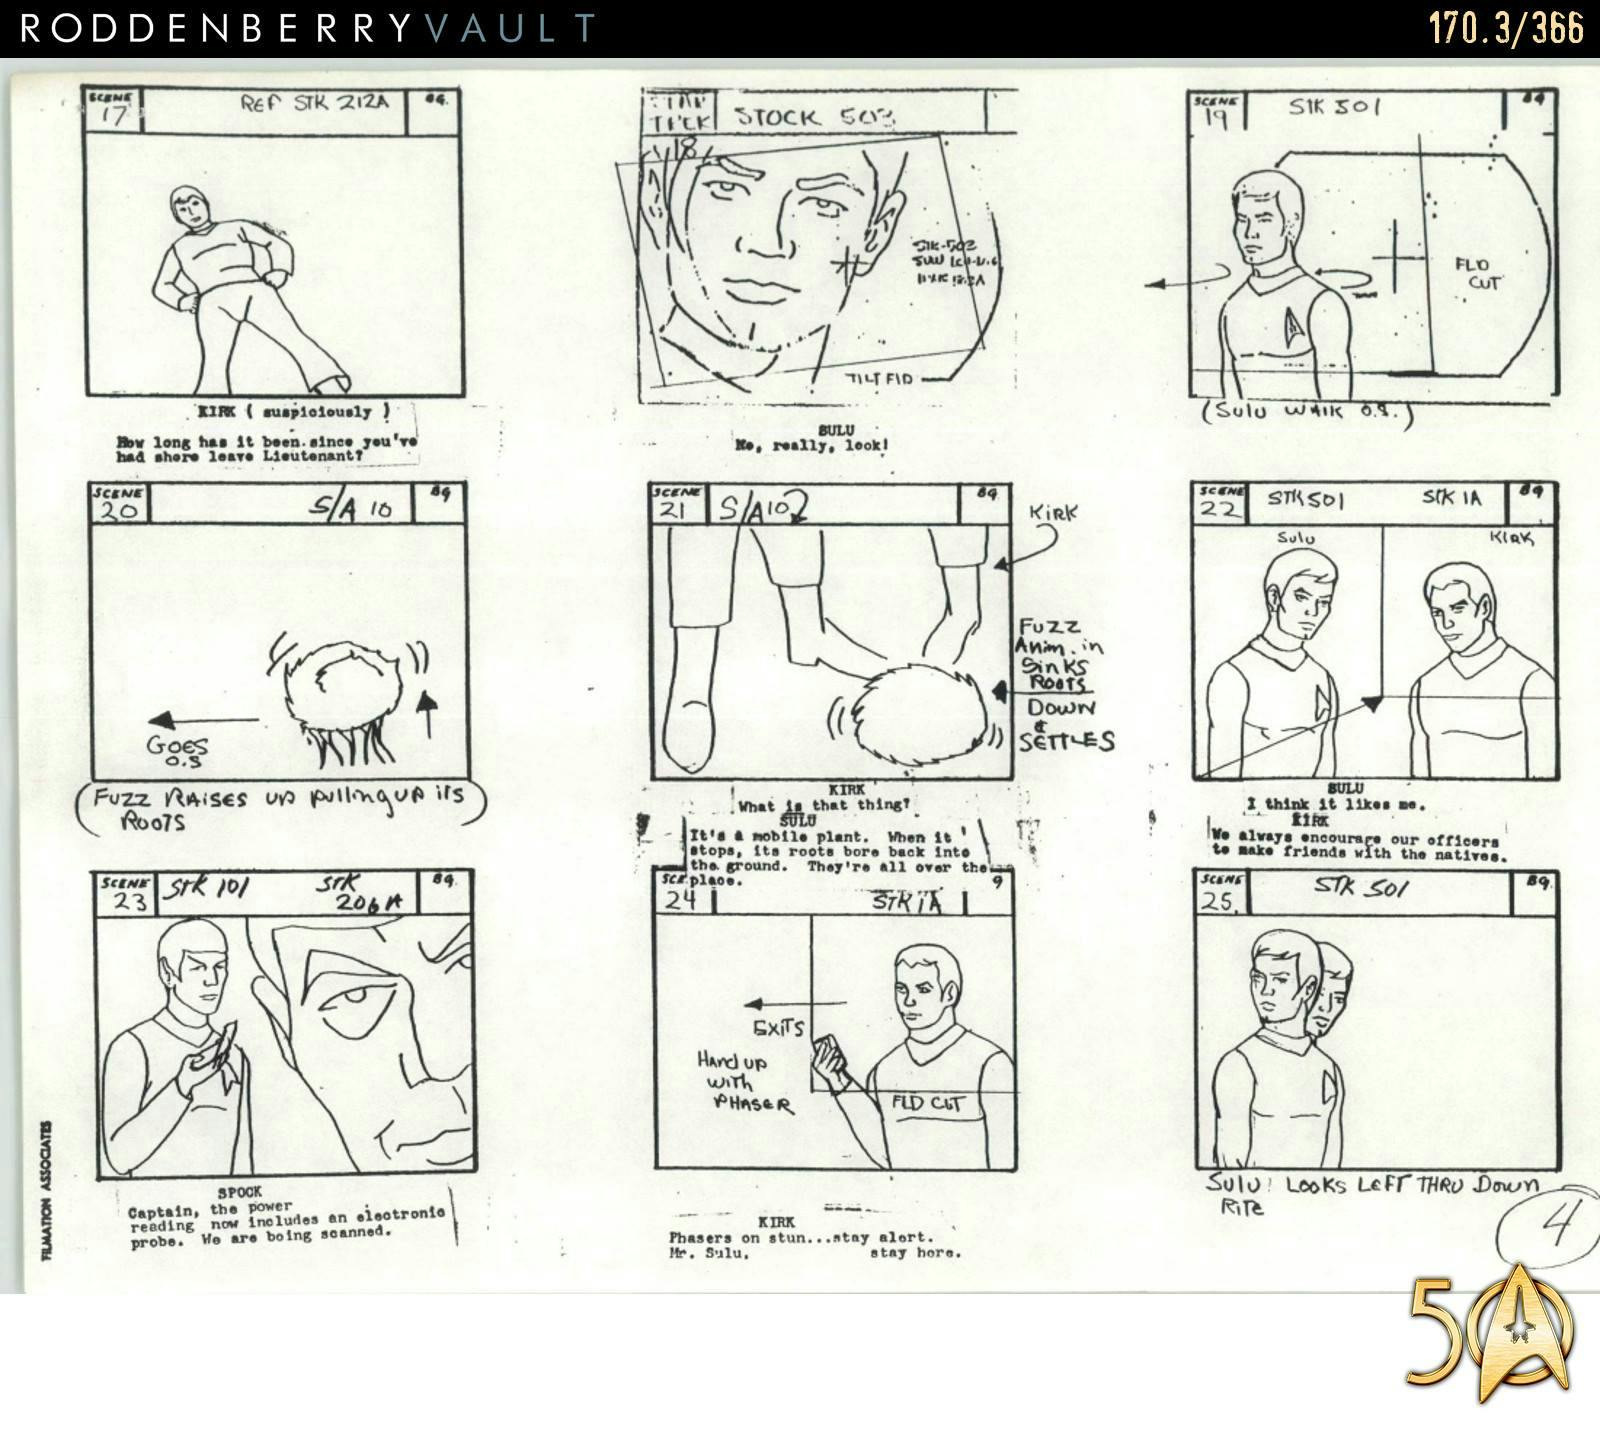 From the Roddenberry 366 Vault - The Animated Series - 'The Infinite Vulcan' storyboards